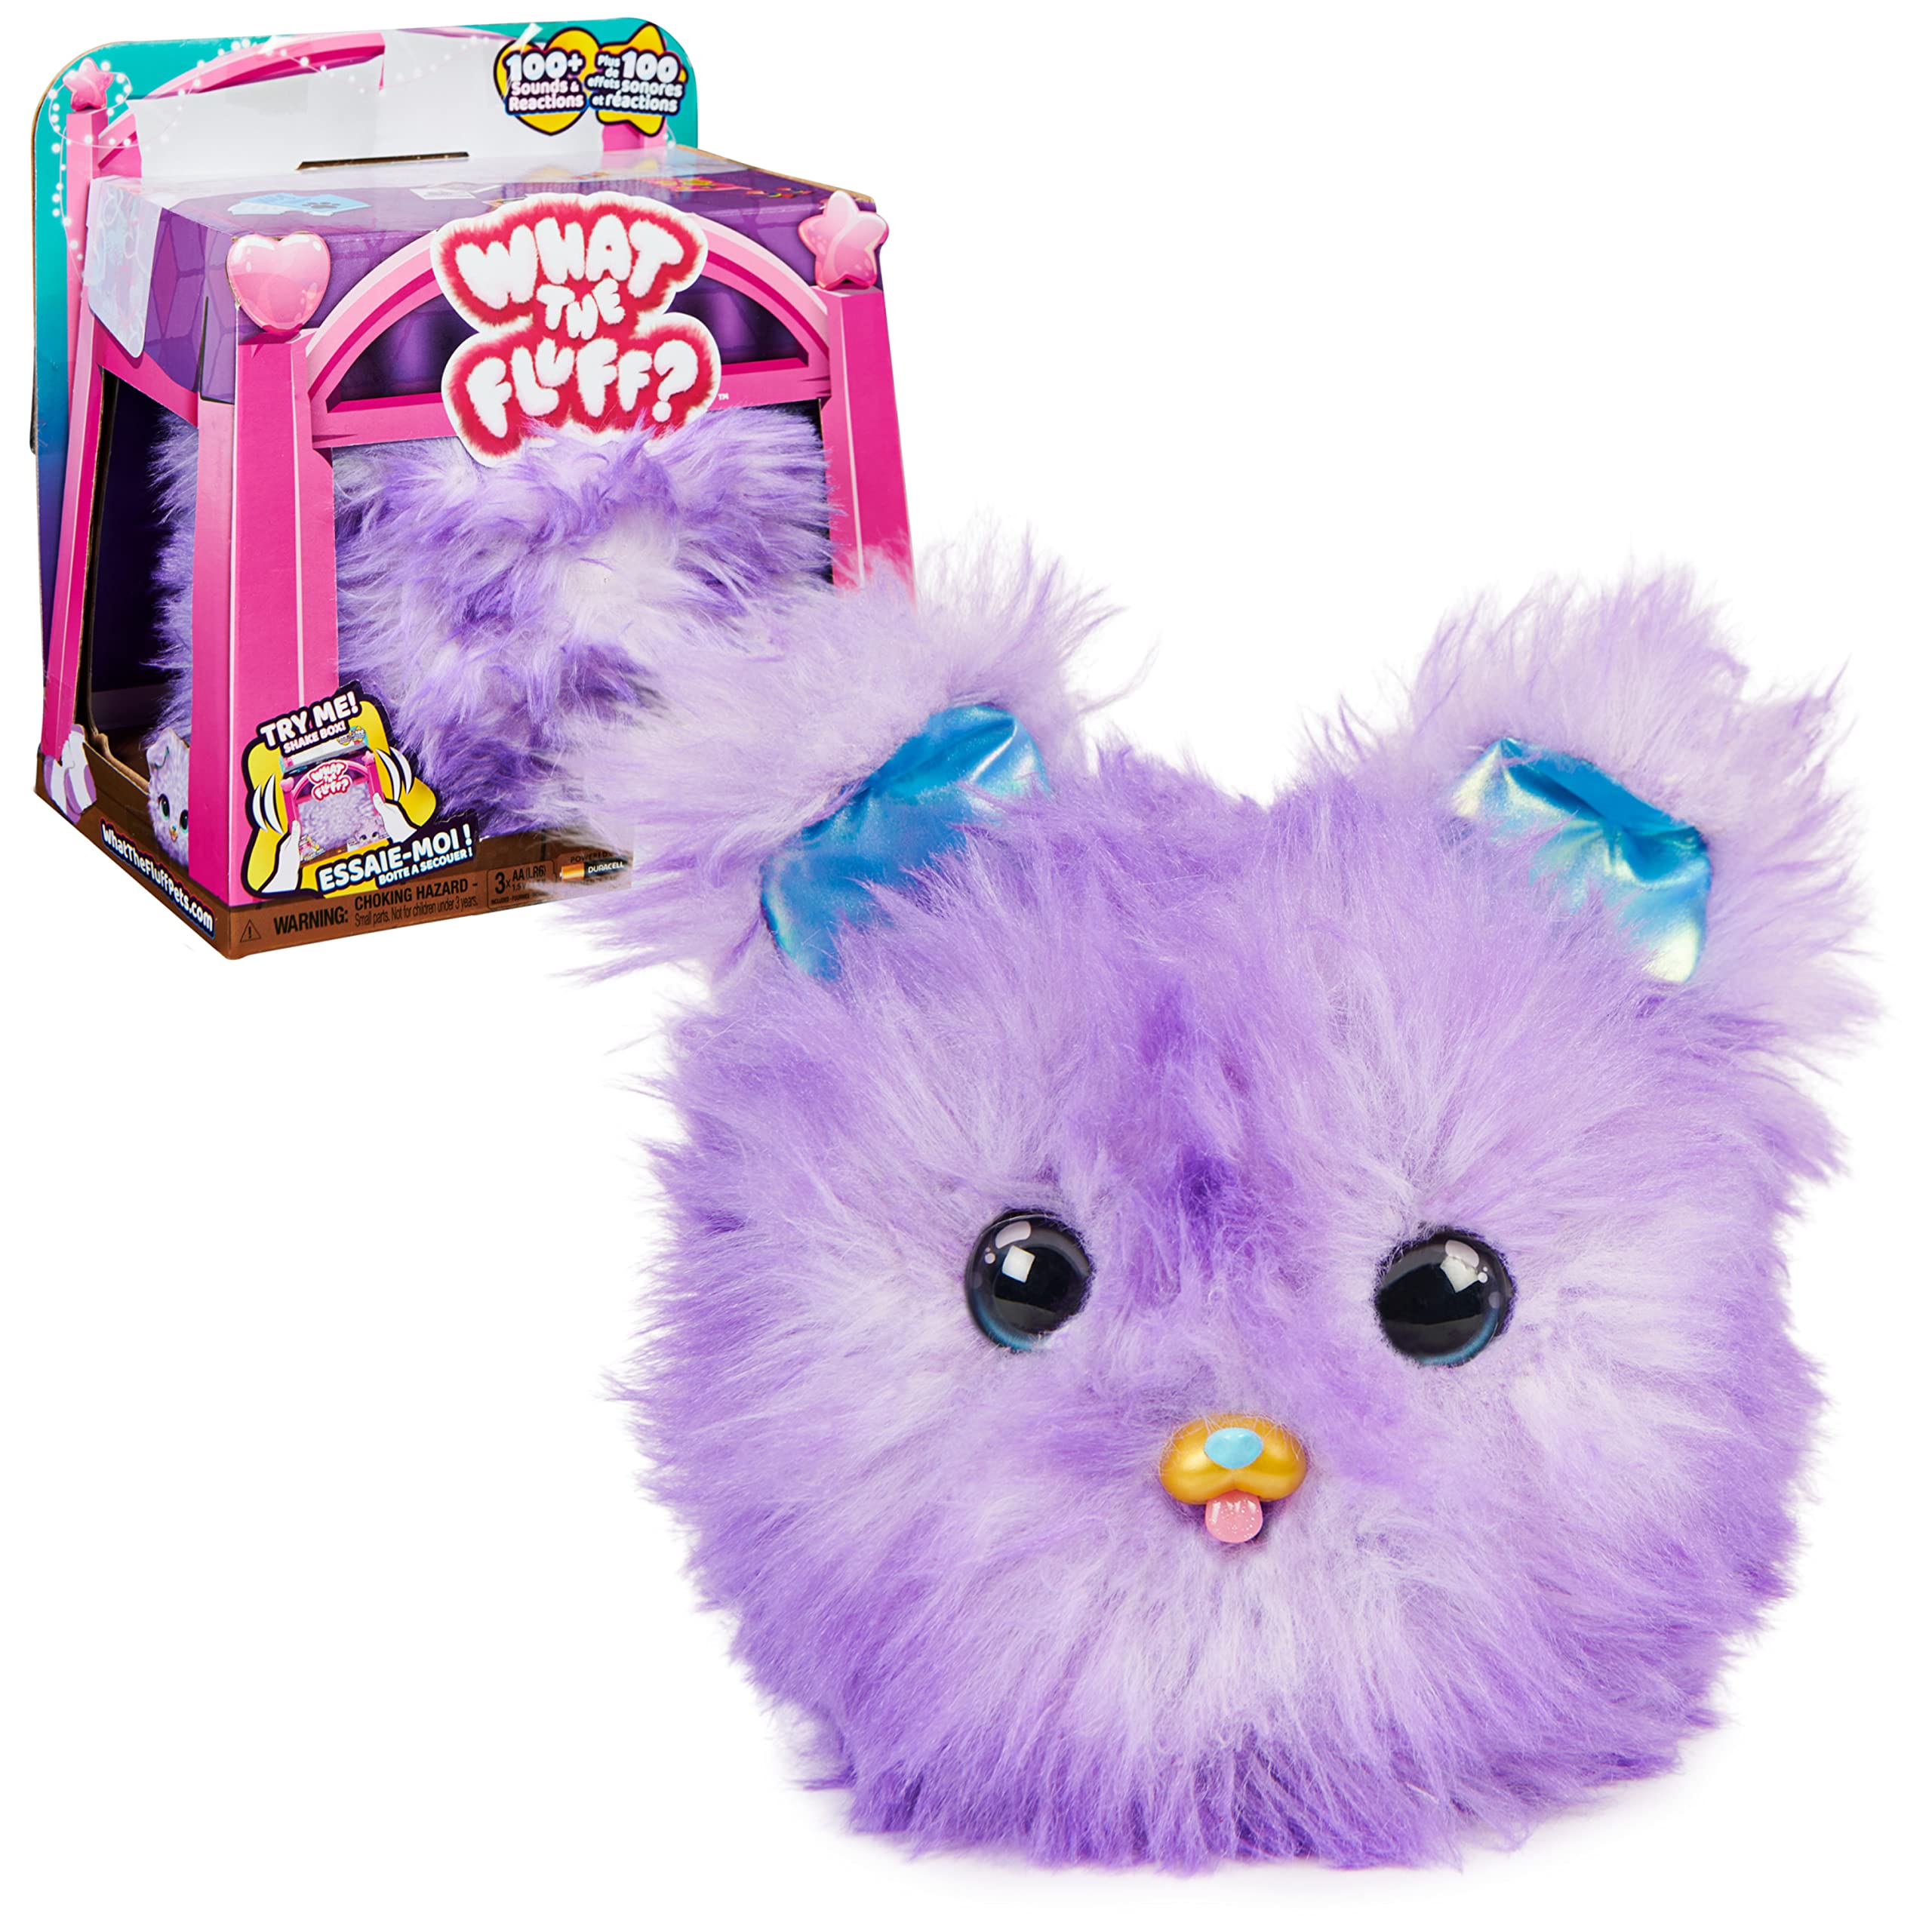 What the Fluff, Pupper-Fluff, Surprise Reveal Interactive Toy Pet With Over 100 Sounds And Reactions, Kids Toys For Girls Ages 5 And up